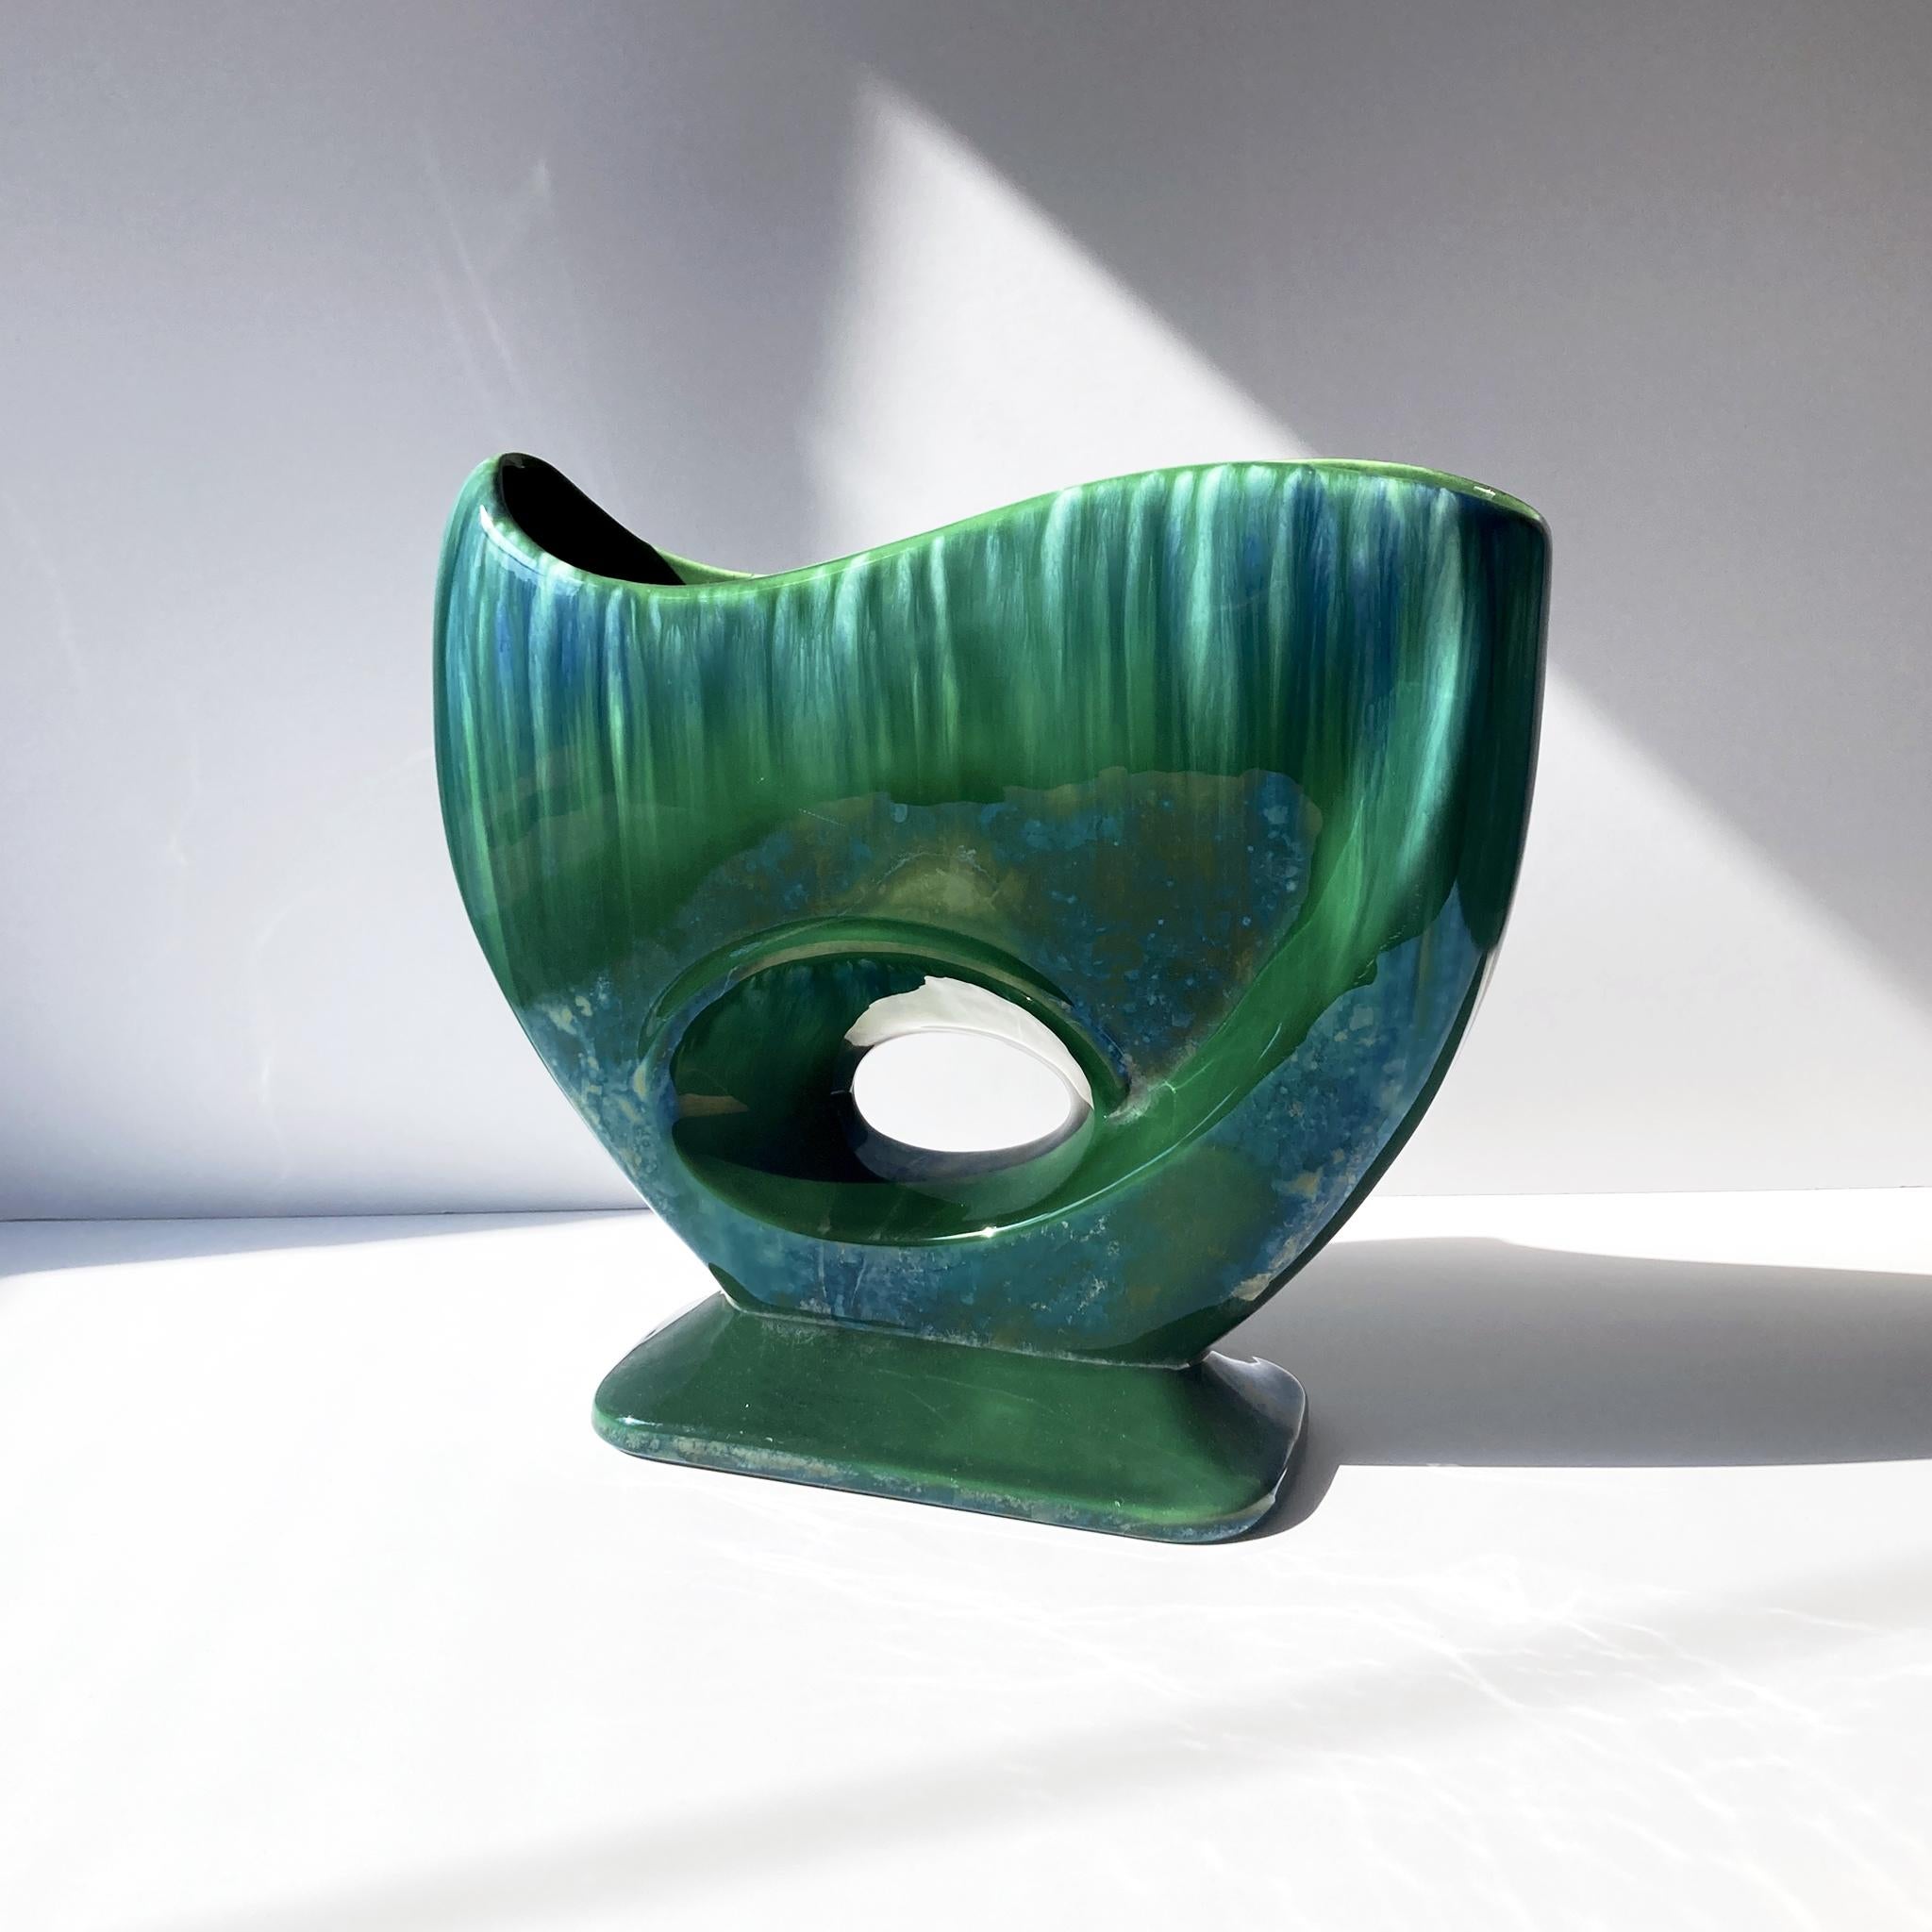 Stunning Royal Haeger Green abstract vase, medium size, model R886. Looks stunning on its own or as part of a group. The drip glaze catches the light beautifully, and there is a light luster glaze over the green. In good vintage condition, some